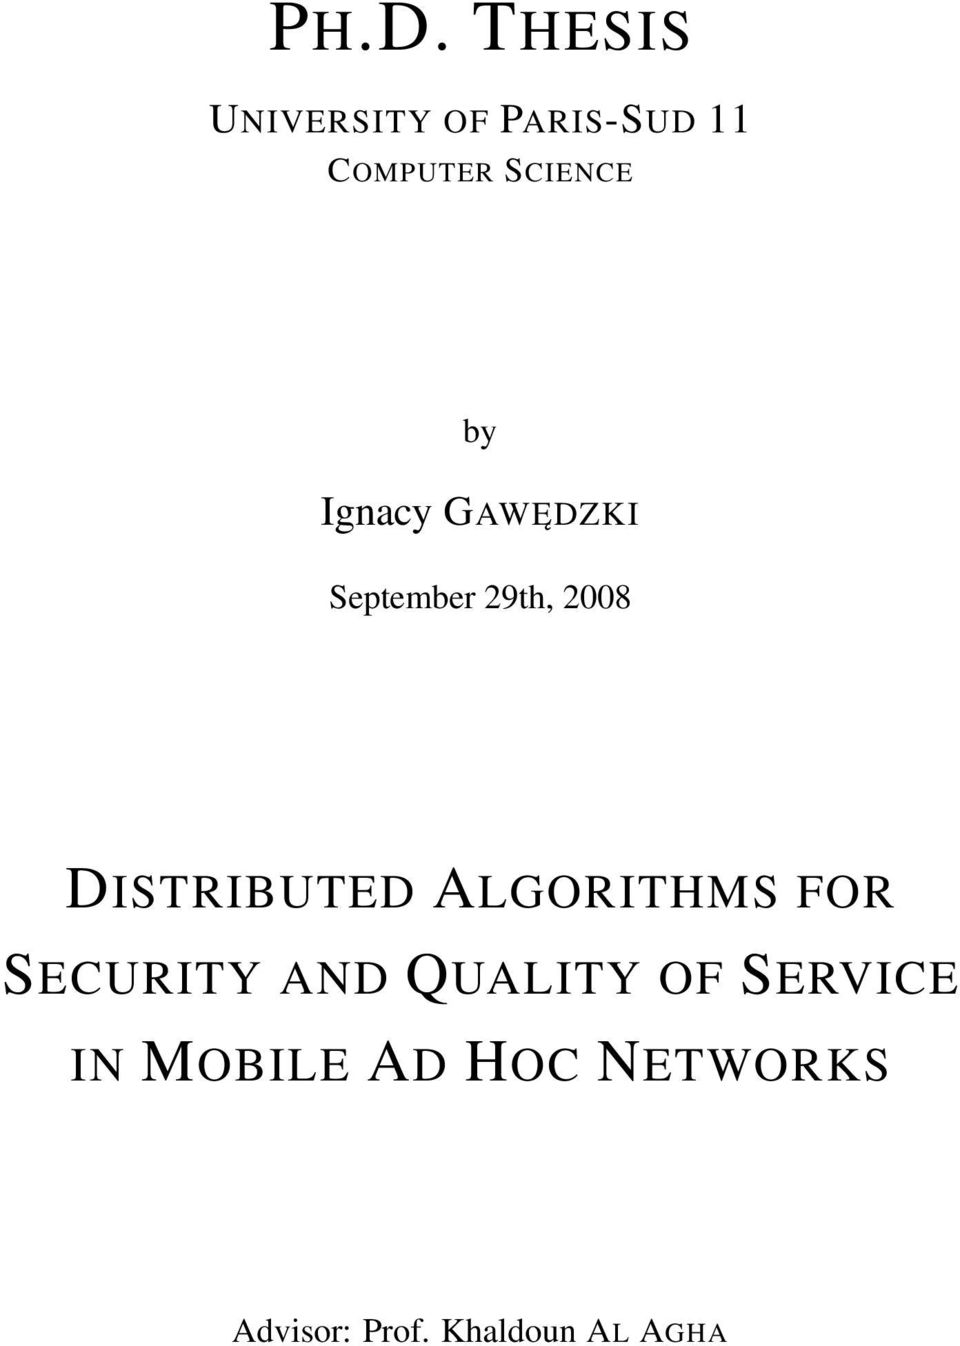 DISTRIBUTED ALGORITHMS FOR SECURITY AND QUALITY OF